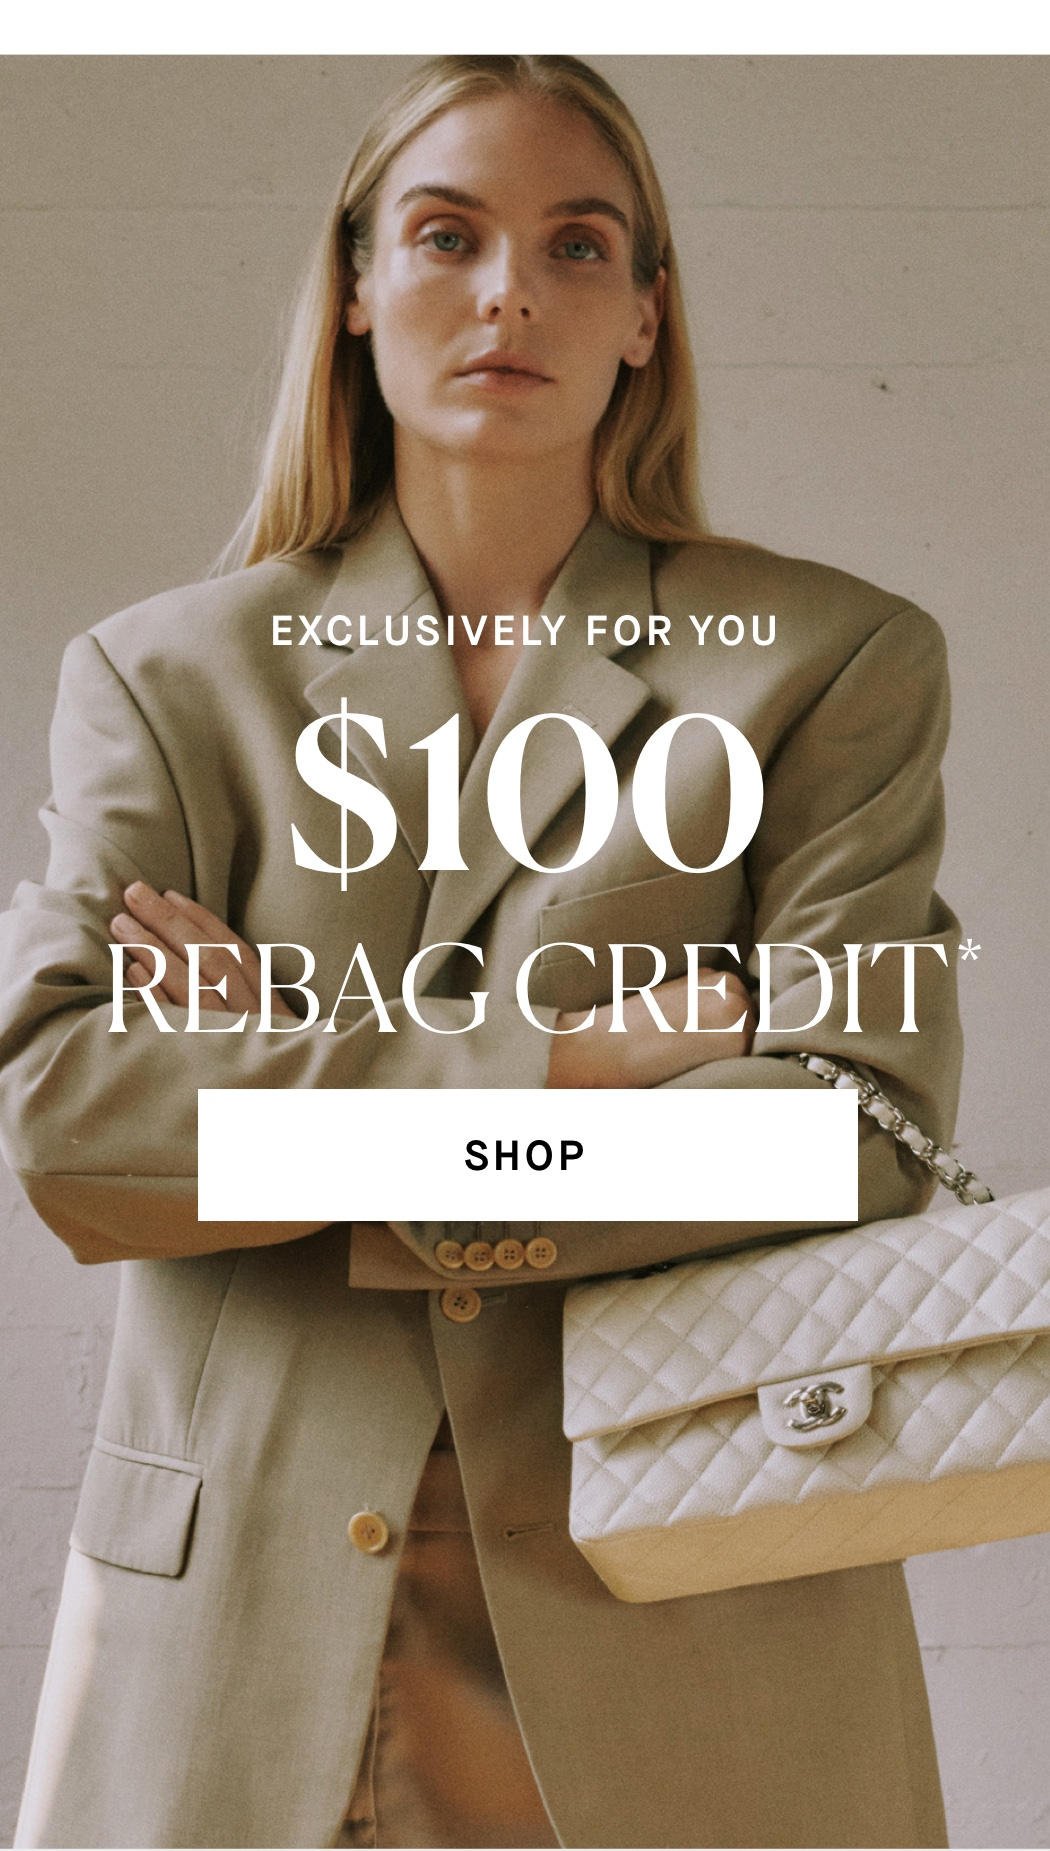 Earn $100 in credit with just a few clicks - Rebag